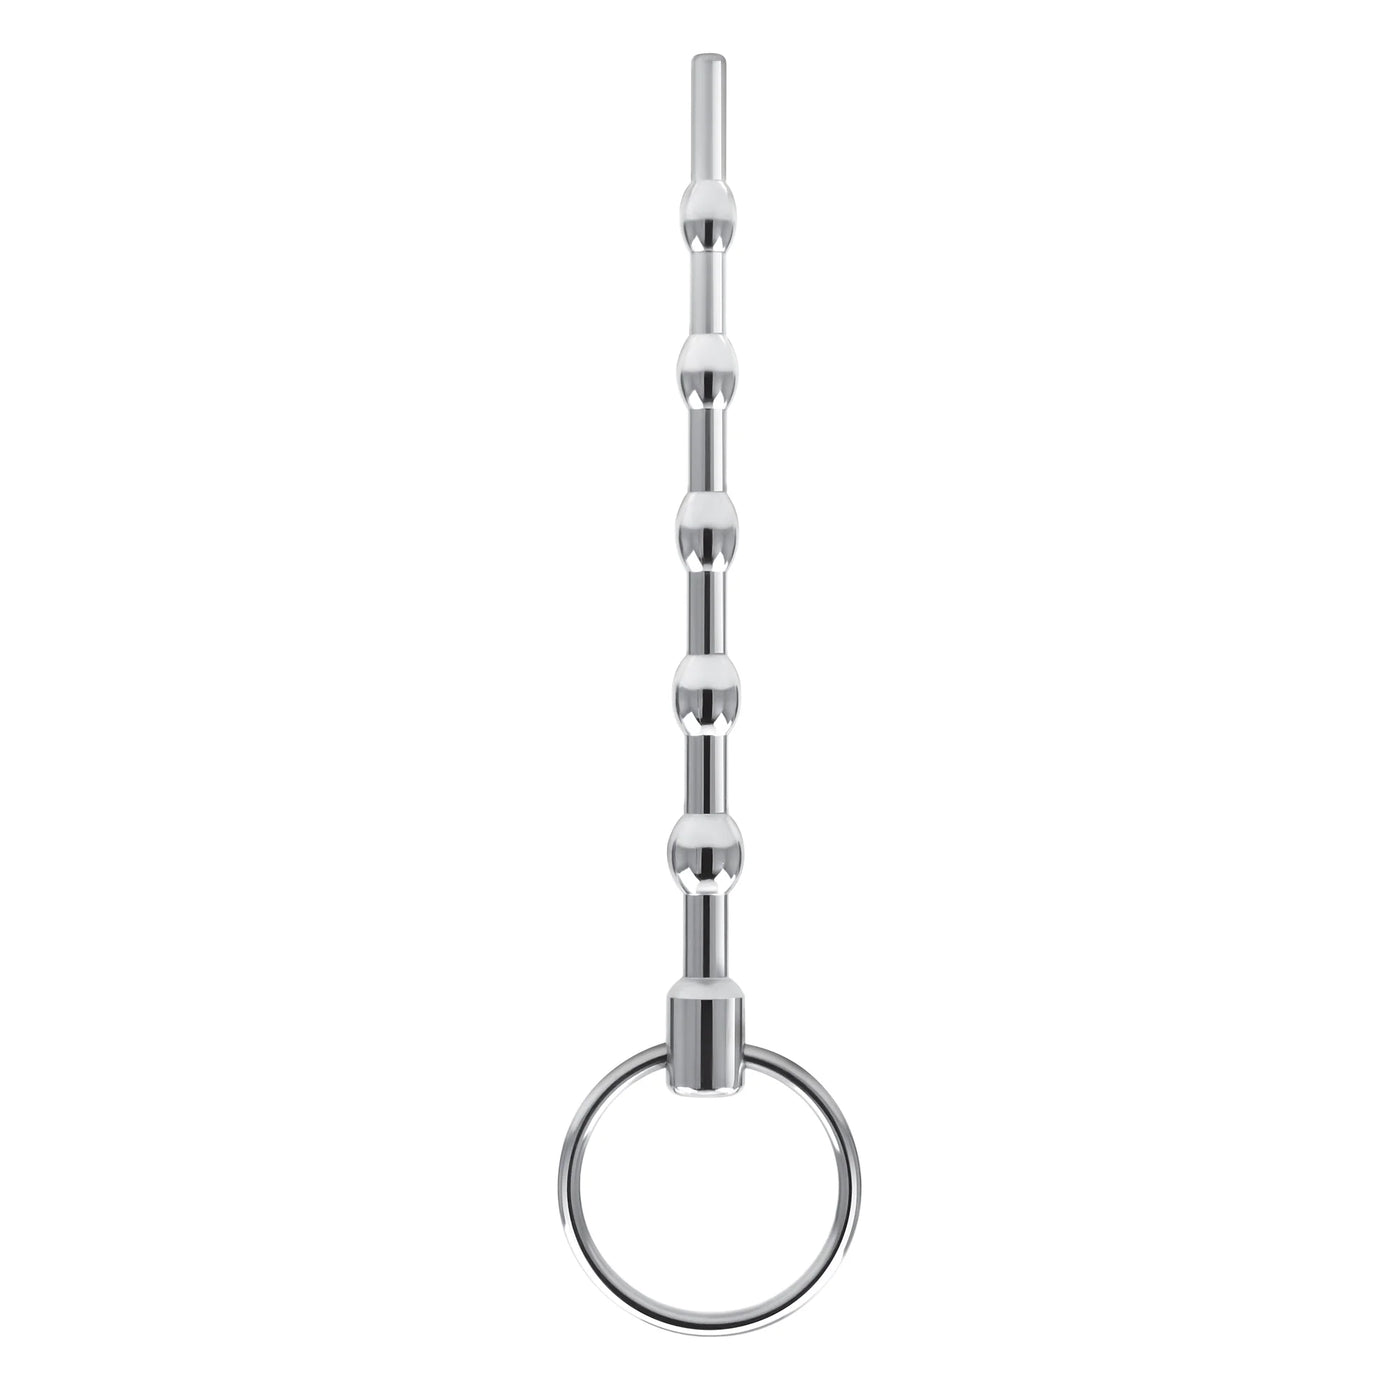 Beaded Urethral Sound, 4.5-Inch Stainless Steel - Hamilton Park Electronics